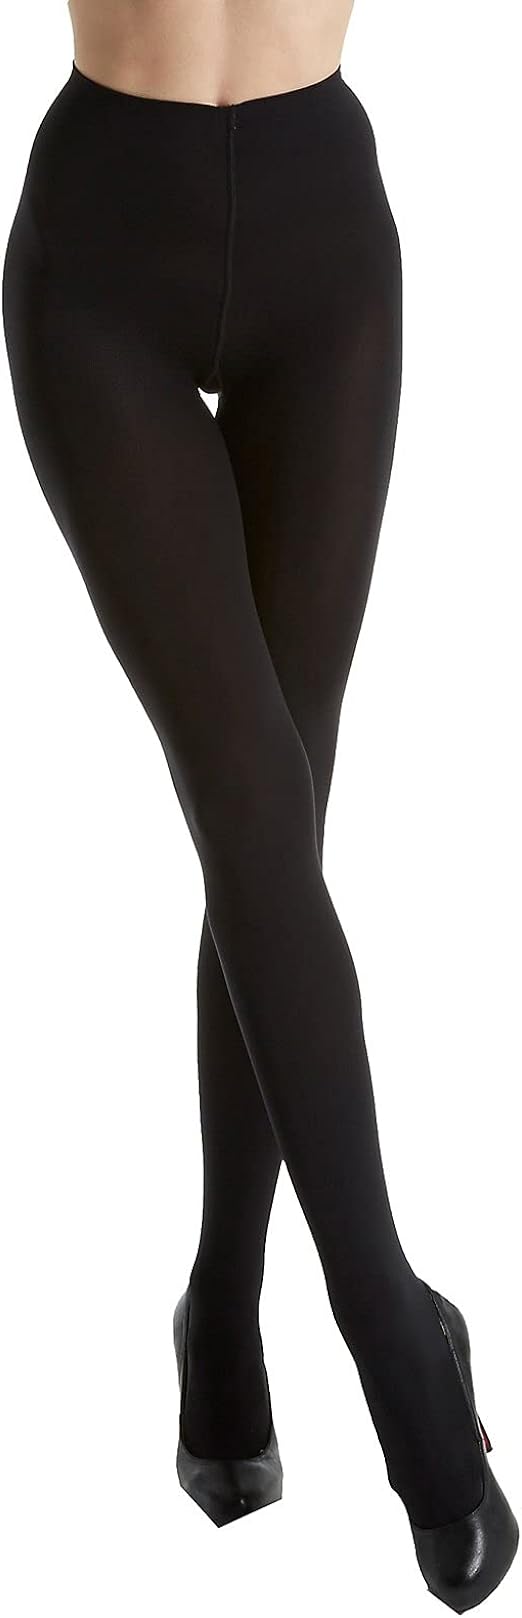 Buy Classy wrap Women Thermal Tights Warm Winter Double Lined Leggings  Stretch Fleece Footless Tights Ladies Opaque Translucent High Waisted Faux  Sheer Pantyhose Stockings - (Black) at